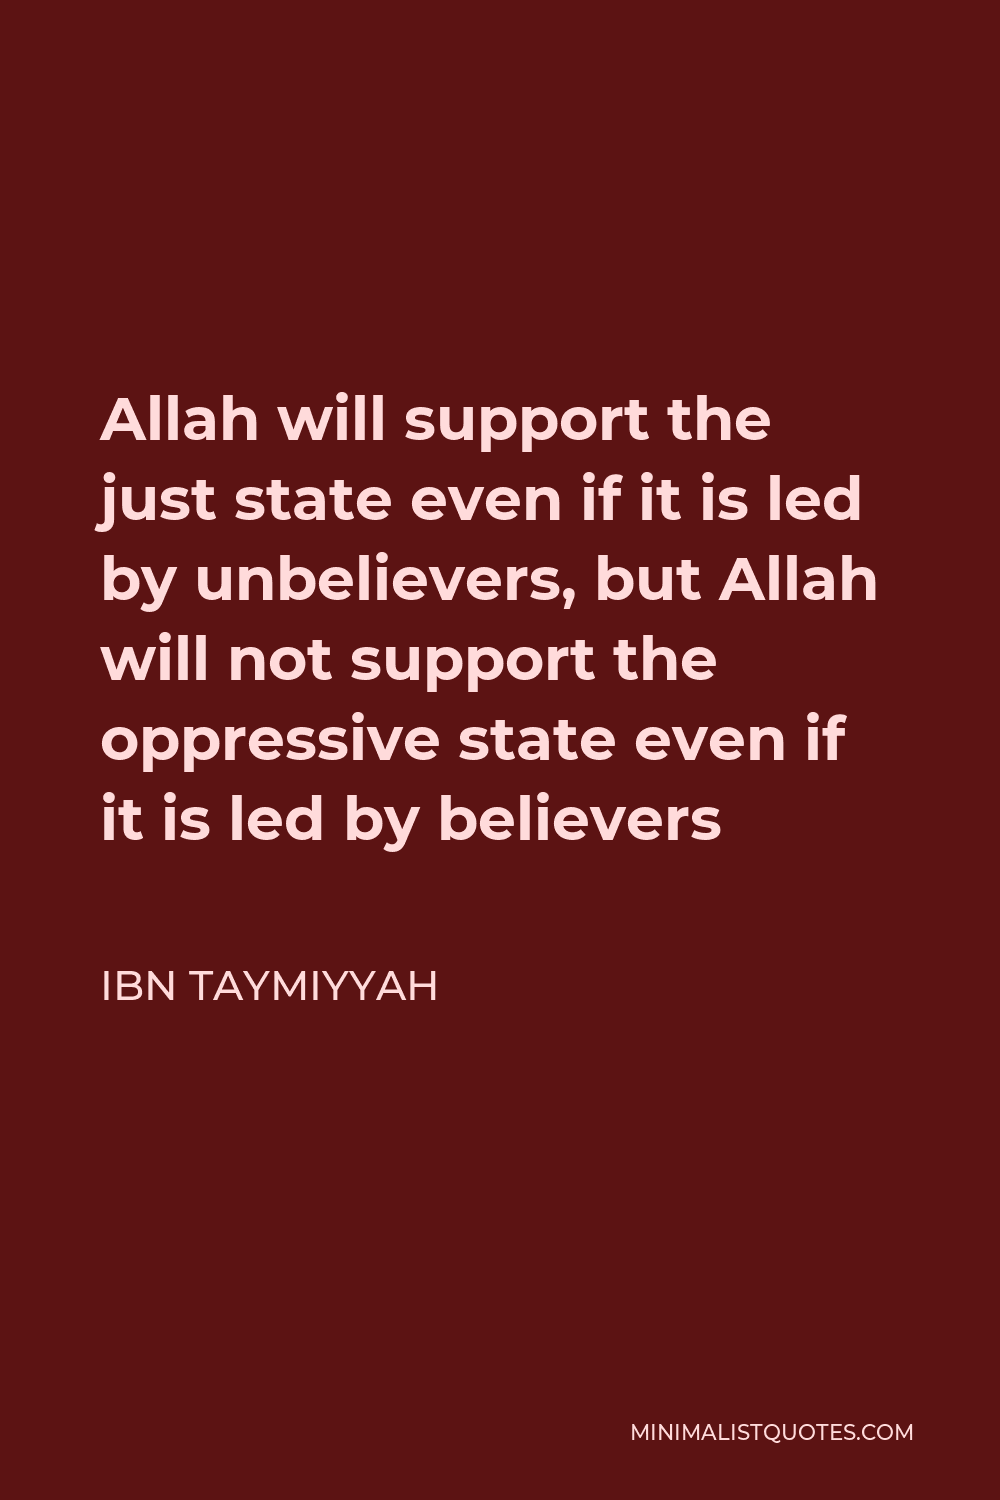 Ibn Taymiyyah Quote - Allah will support the just state even if it is led by unbelievers, but Allah will not support the oppressive state even if it is led by believers